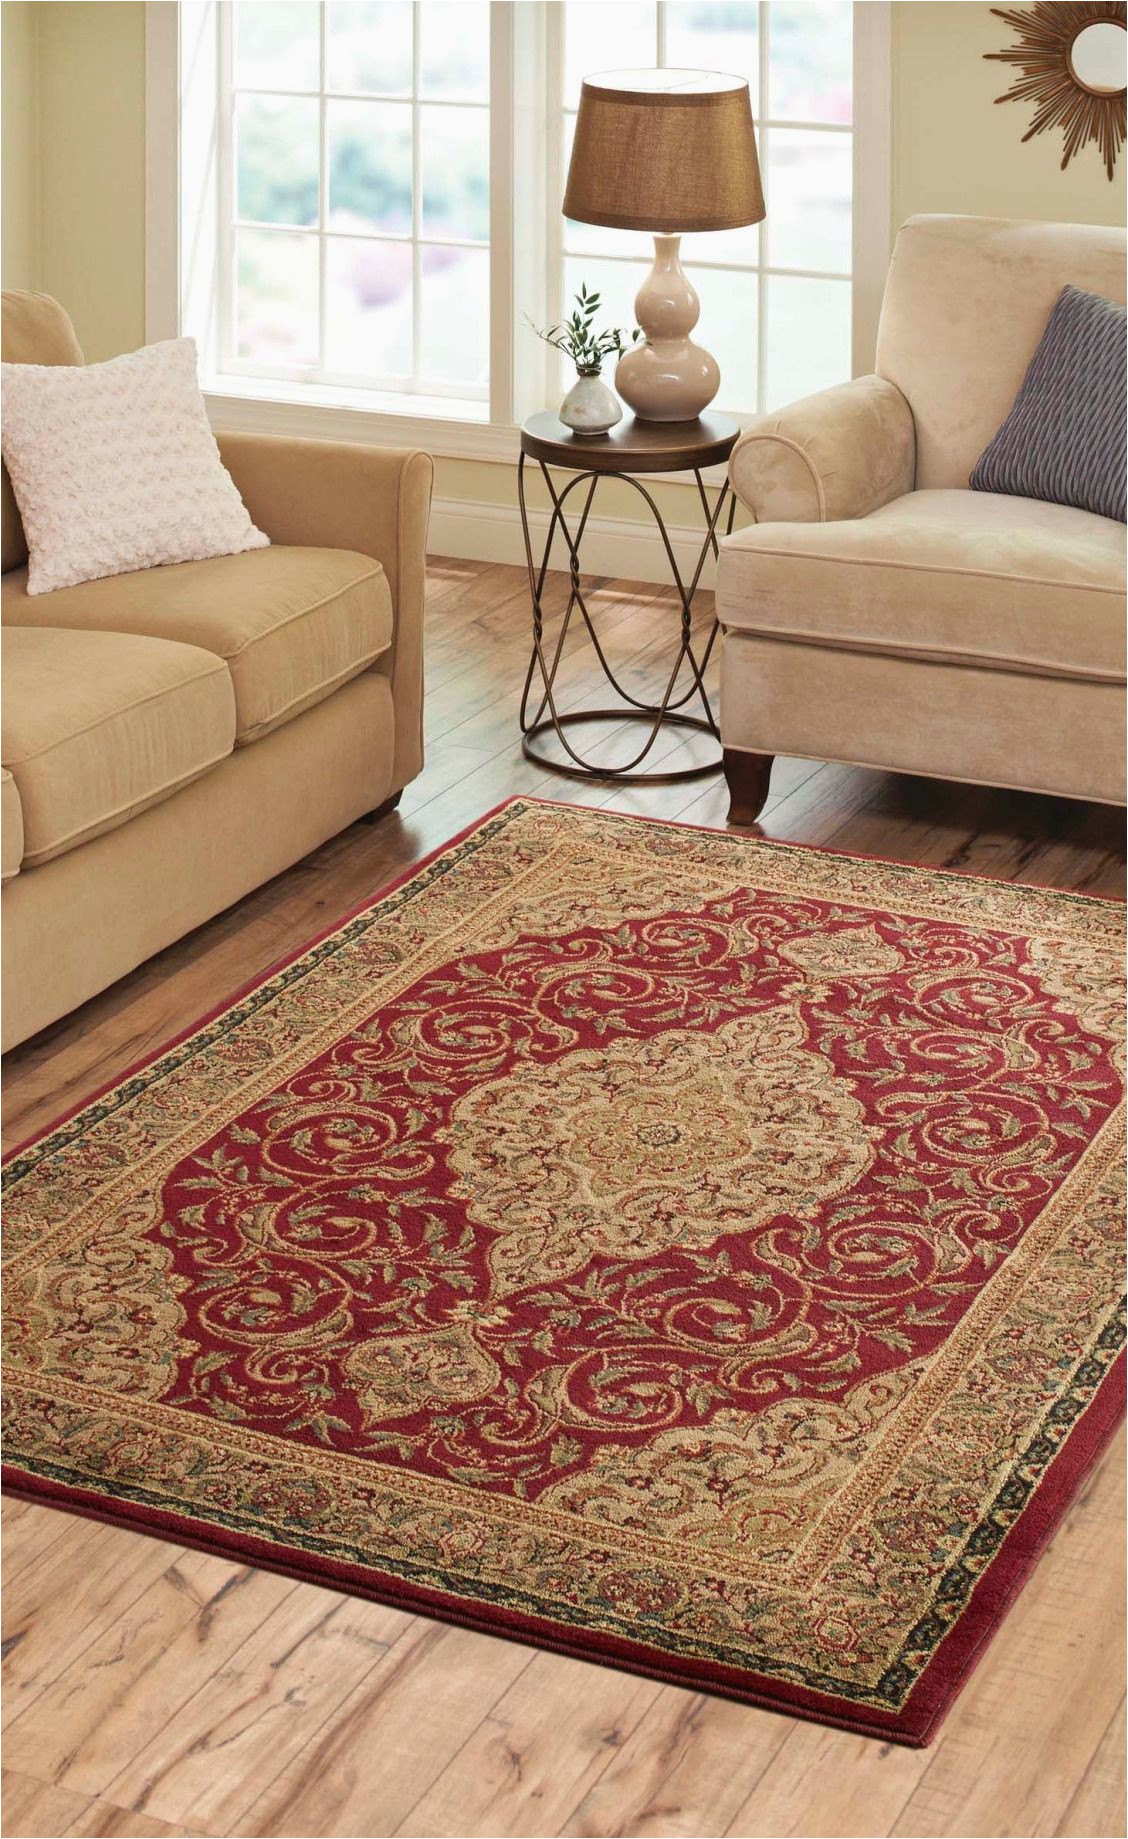 Better Homes and Gardens area Rugs at Walmart Better Homes and Gardens Gina area Rug